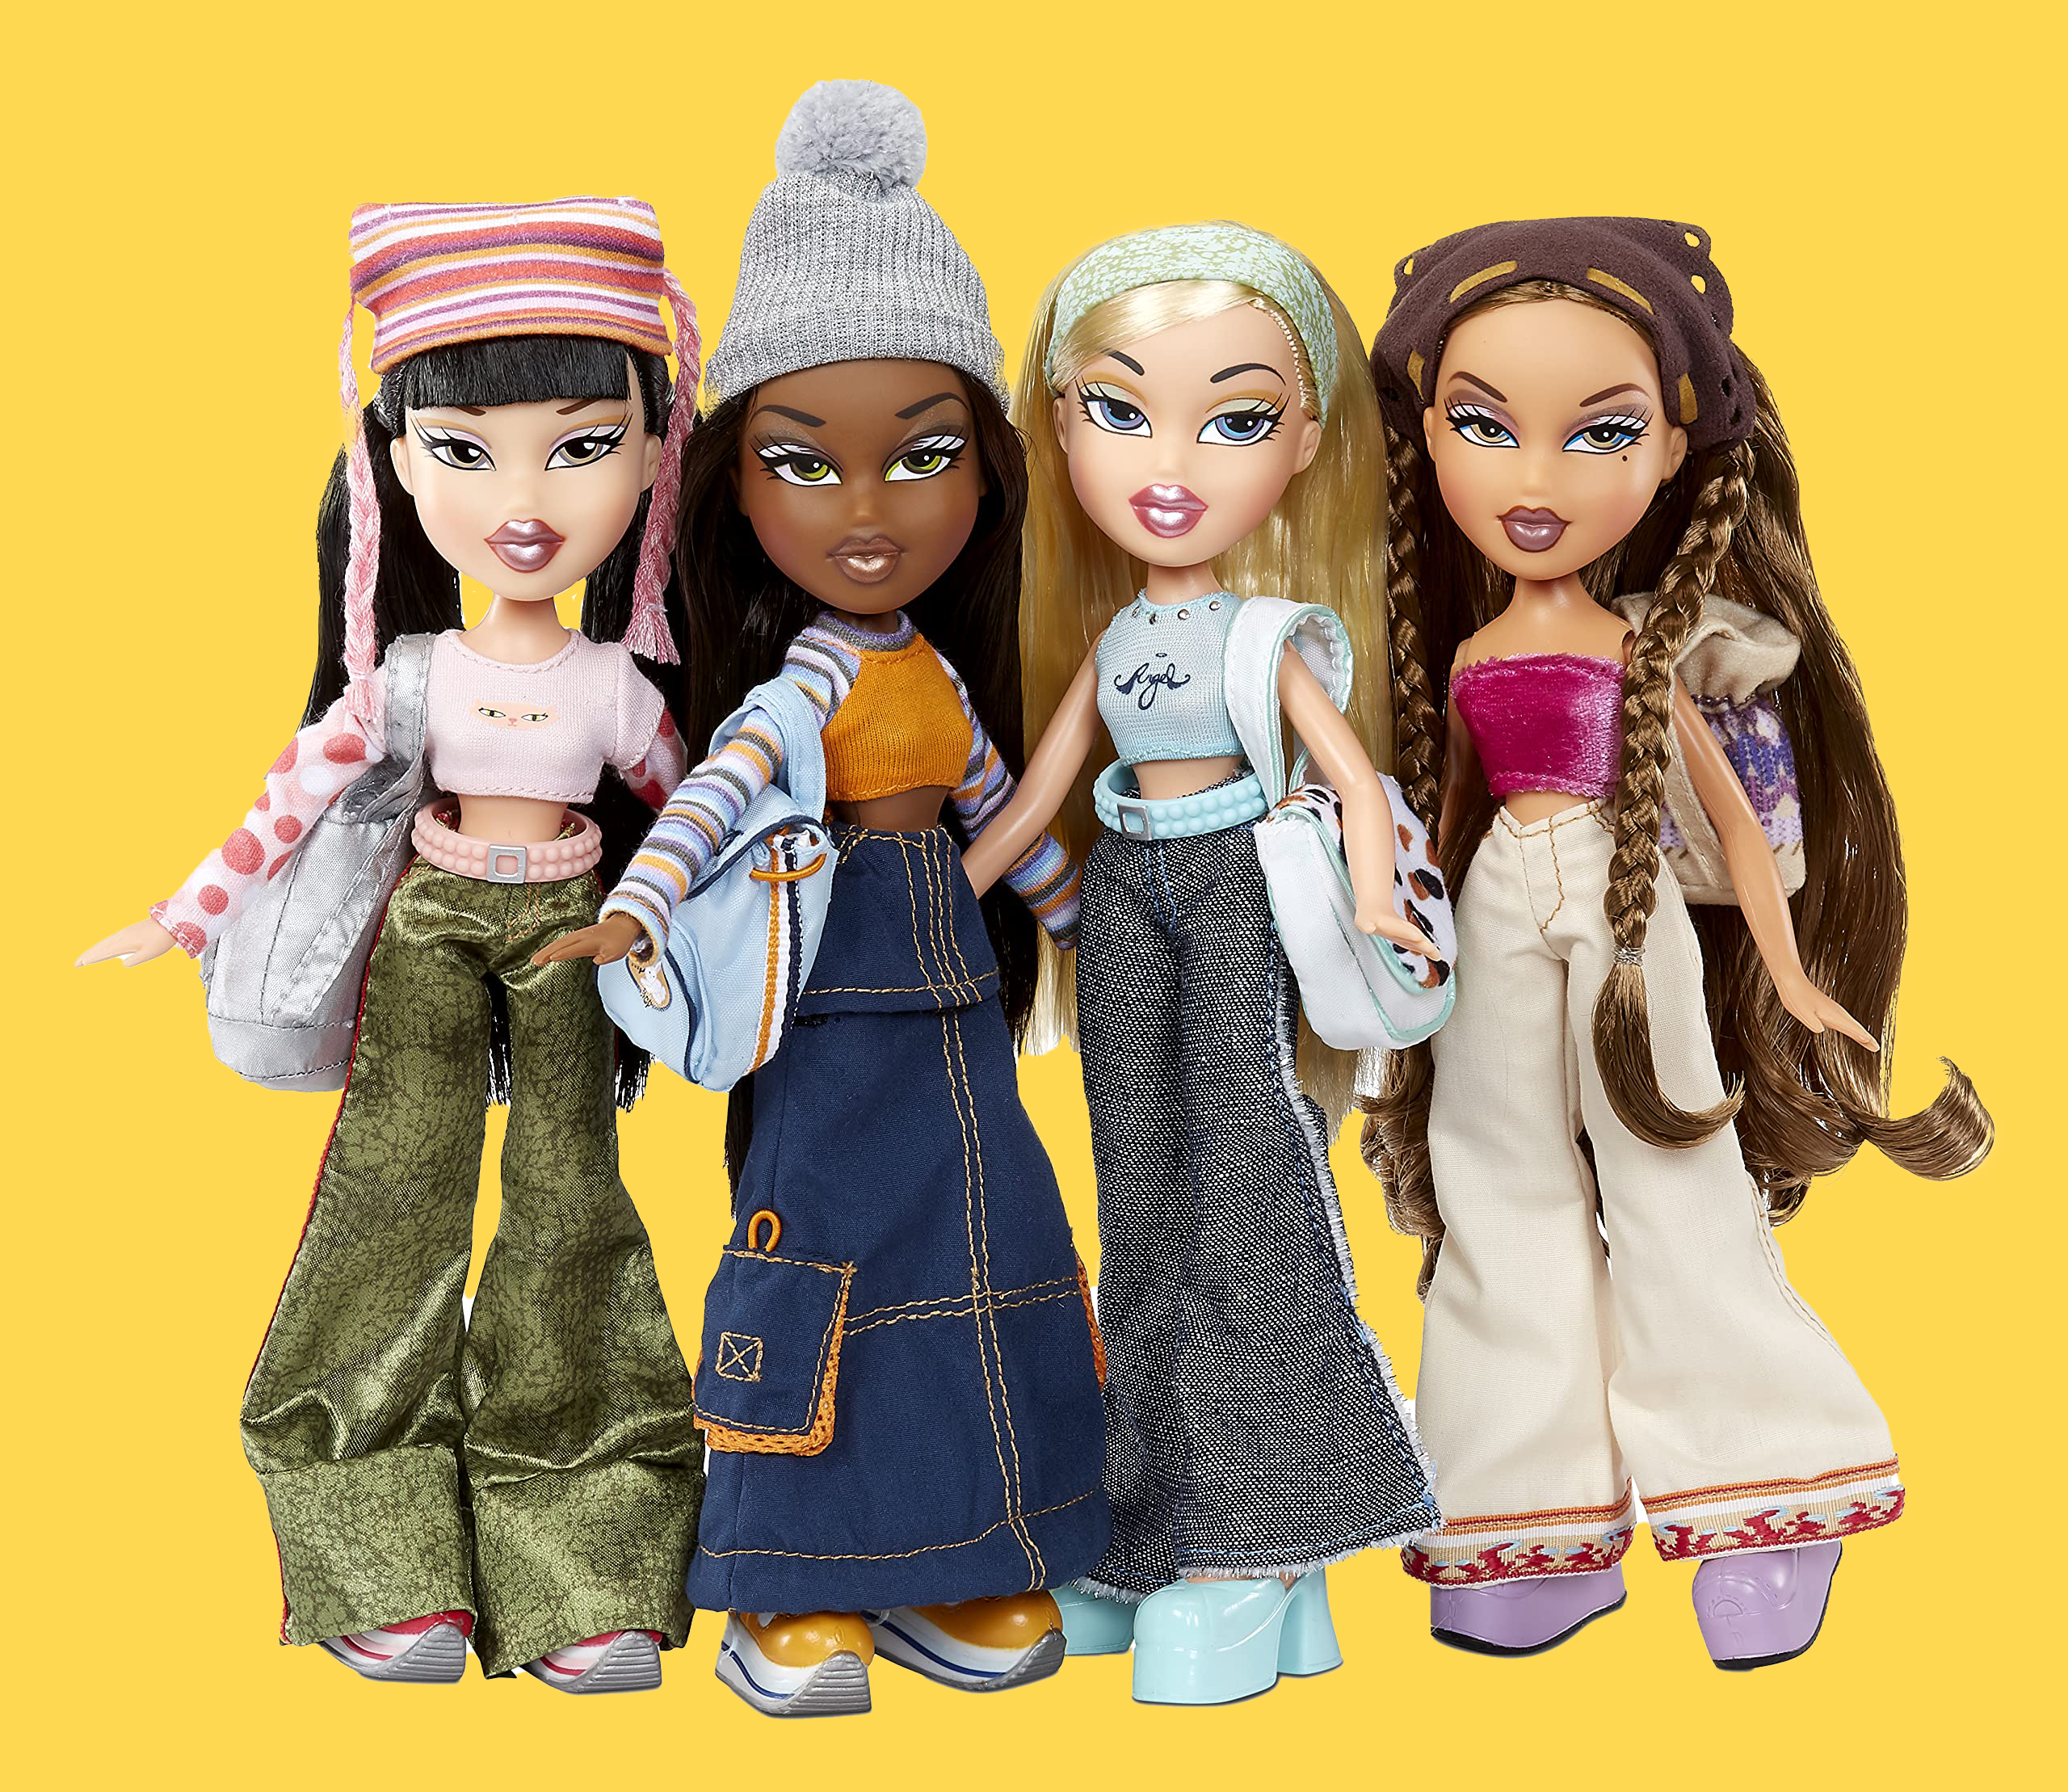 Barbie' Movie Is About More Than Selling Dolls for Mattel